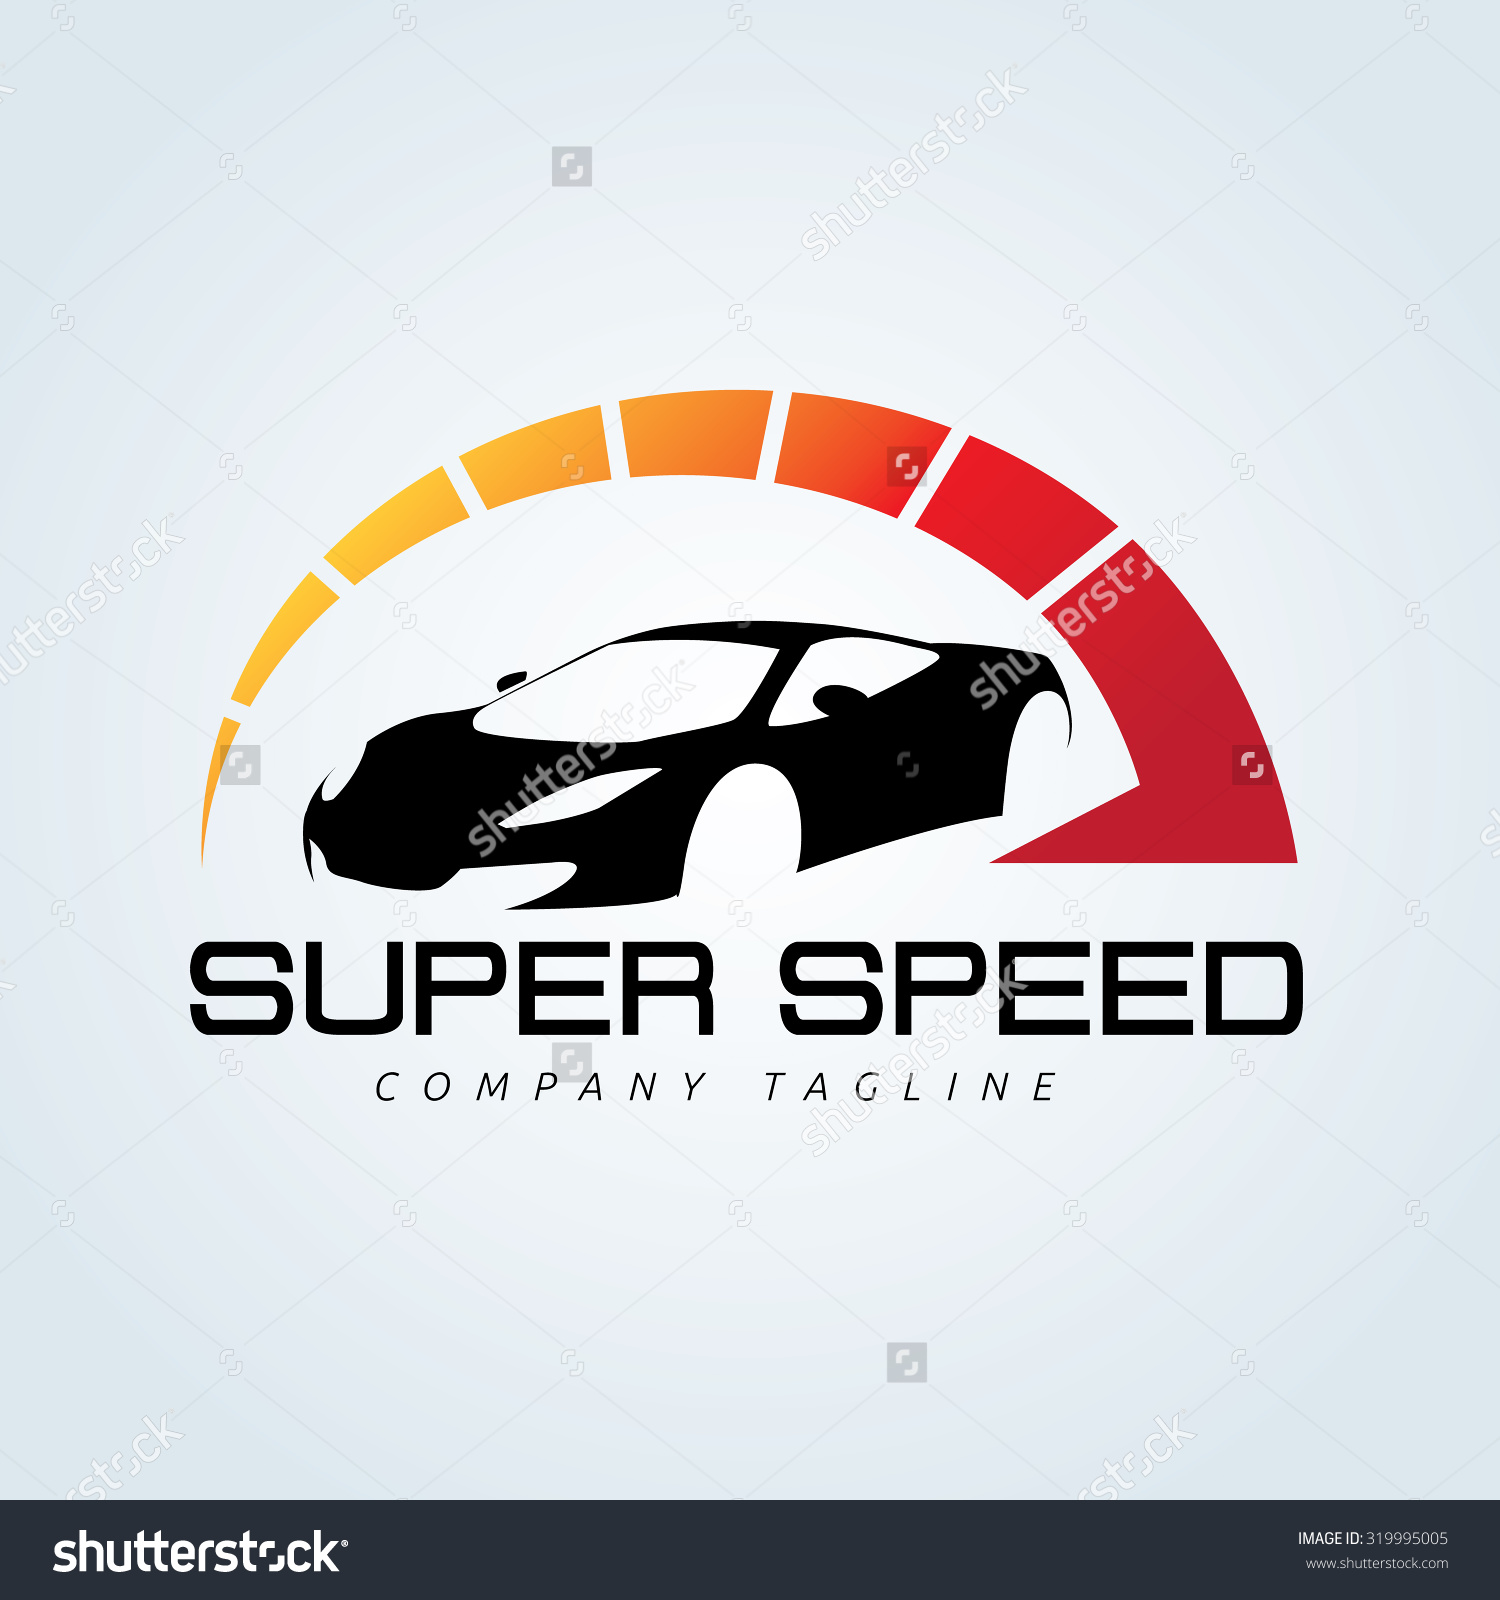 Super Speed clipart #9, Download drawings